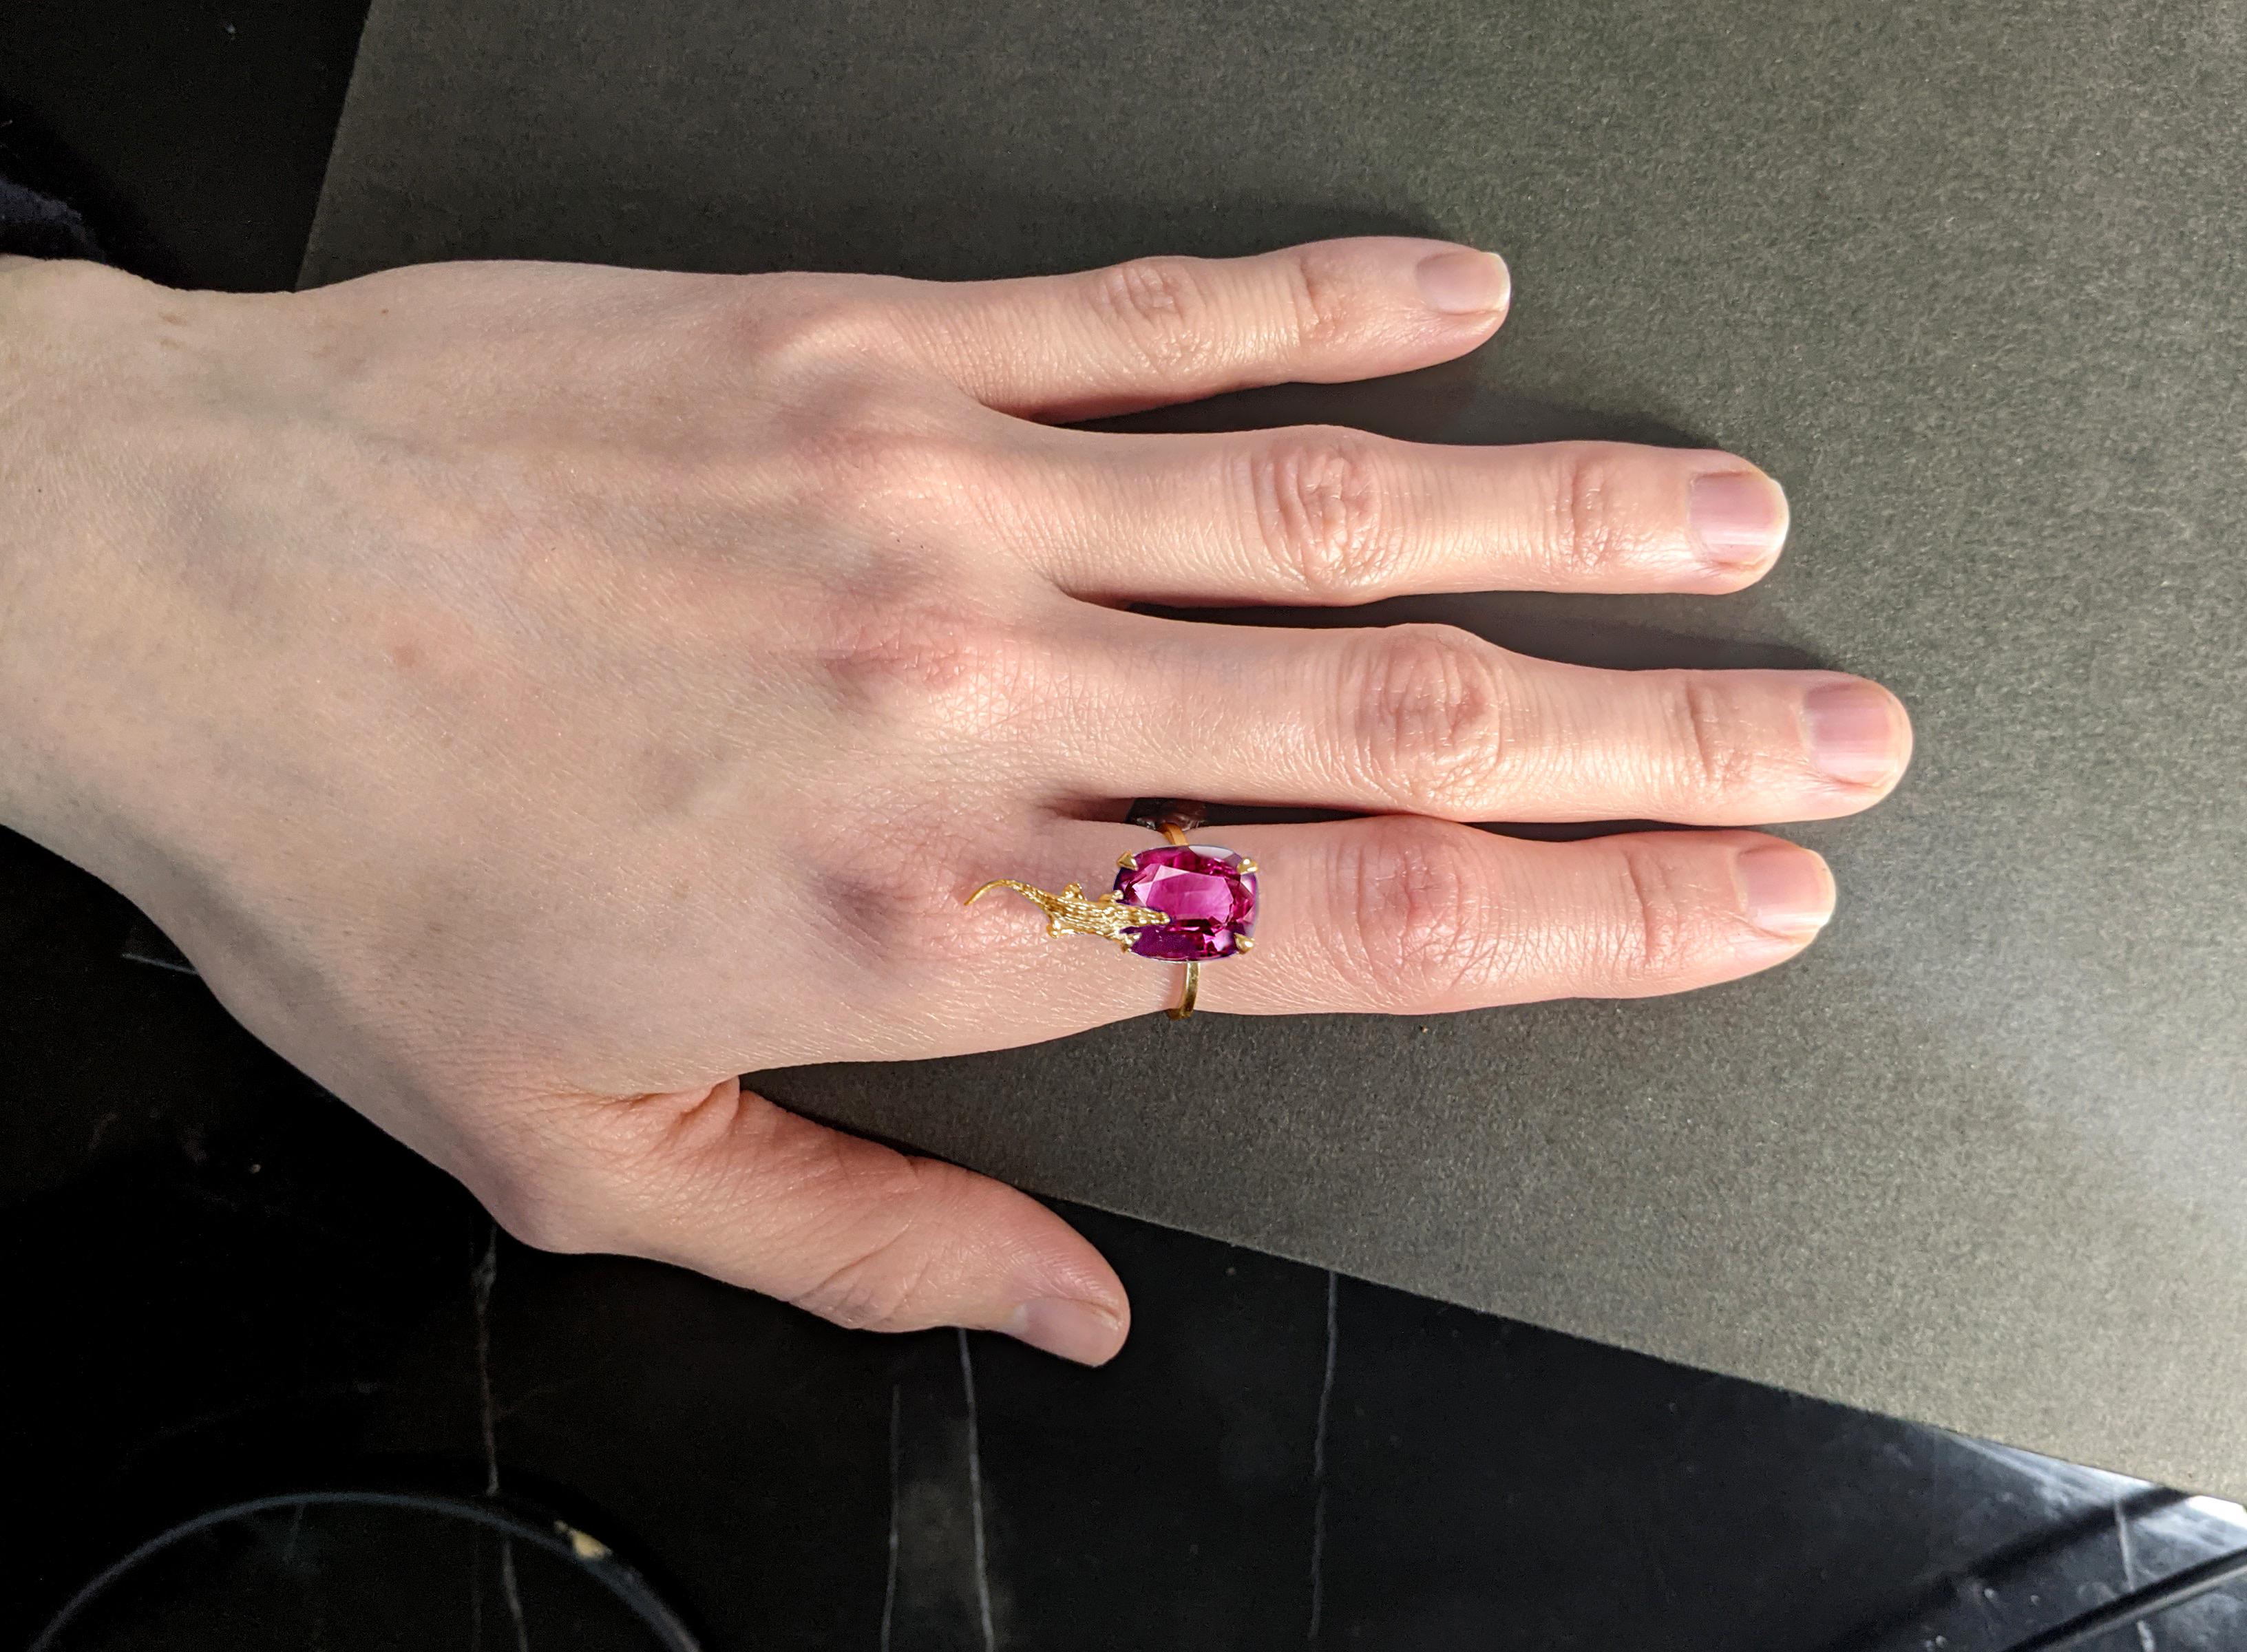 This 18 karat yellow gold contemporary Engagement Ring by the artist is encrusted with 3.64 carats of natural pink spinel from Burma (Myanmar), featuring a rare cushion author perfect cut with breathtaking pink color measuring 9.55x7.98x5.67 mm.